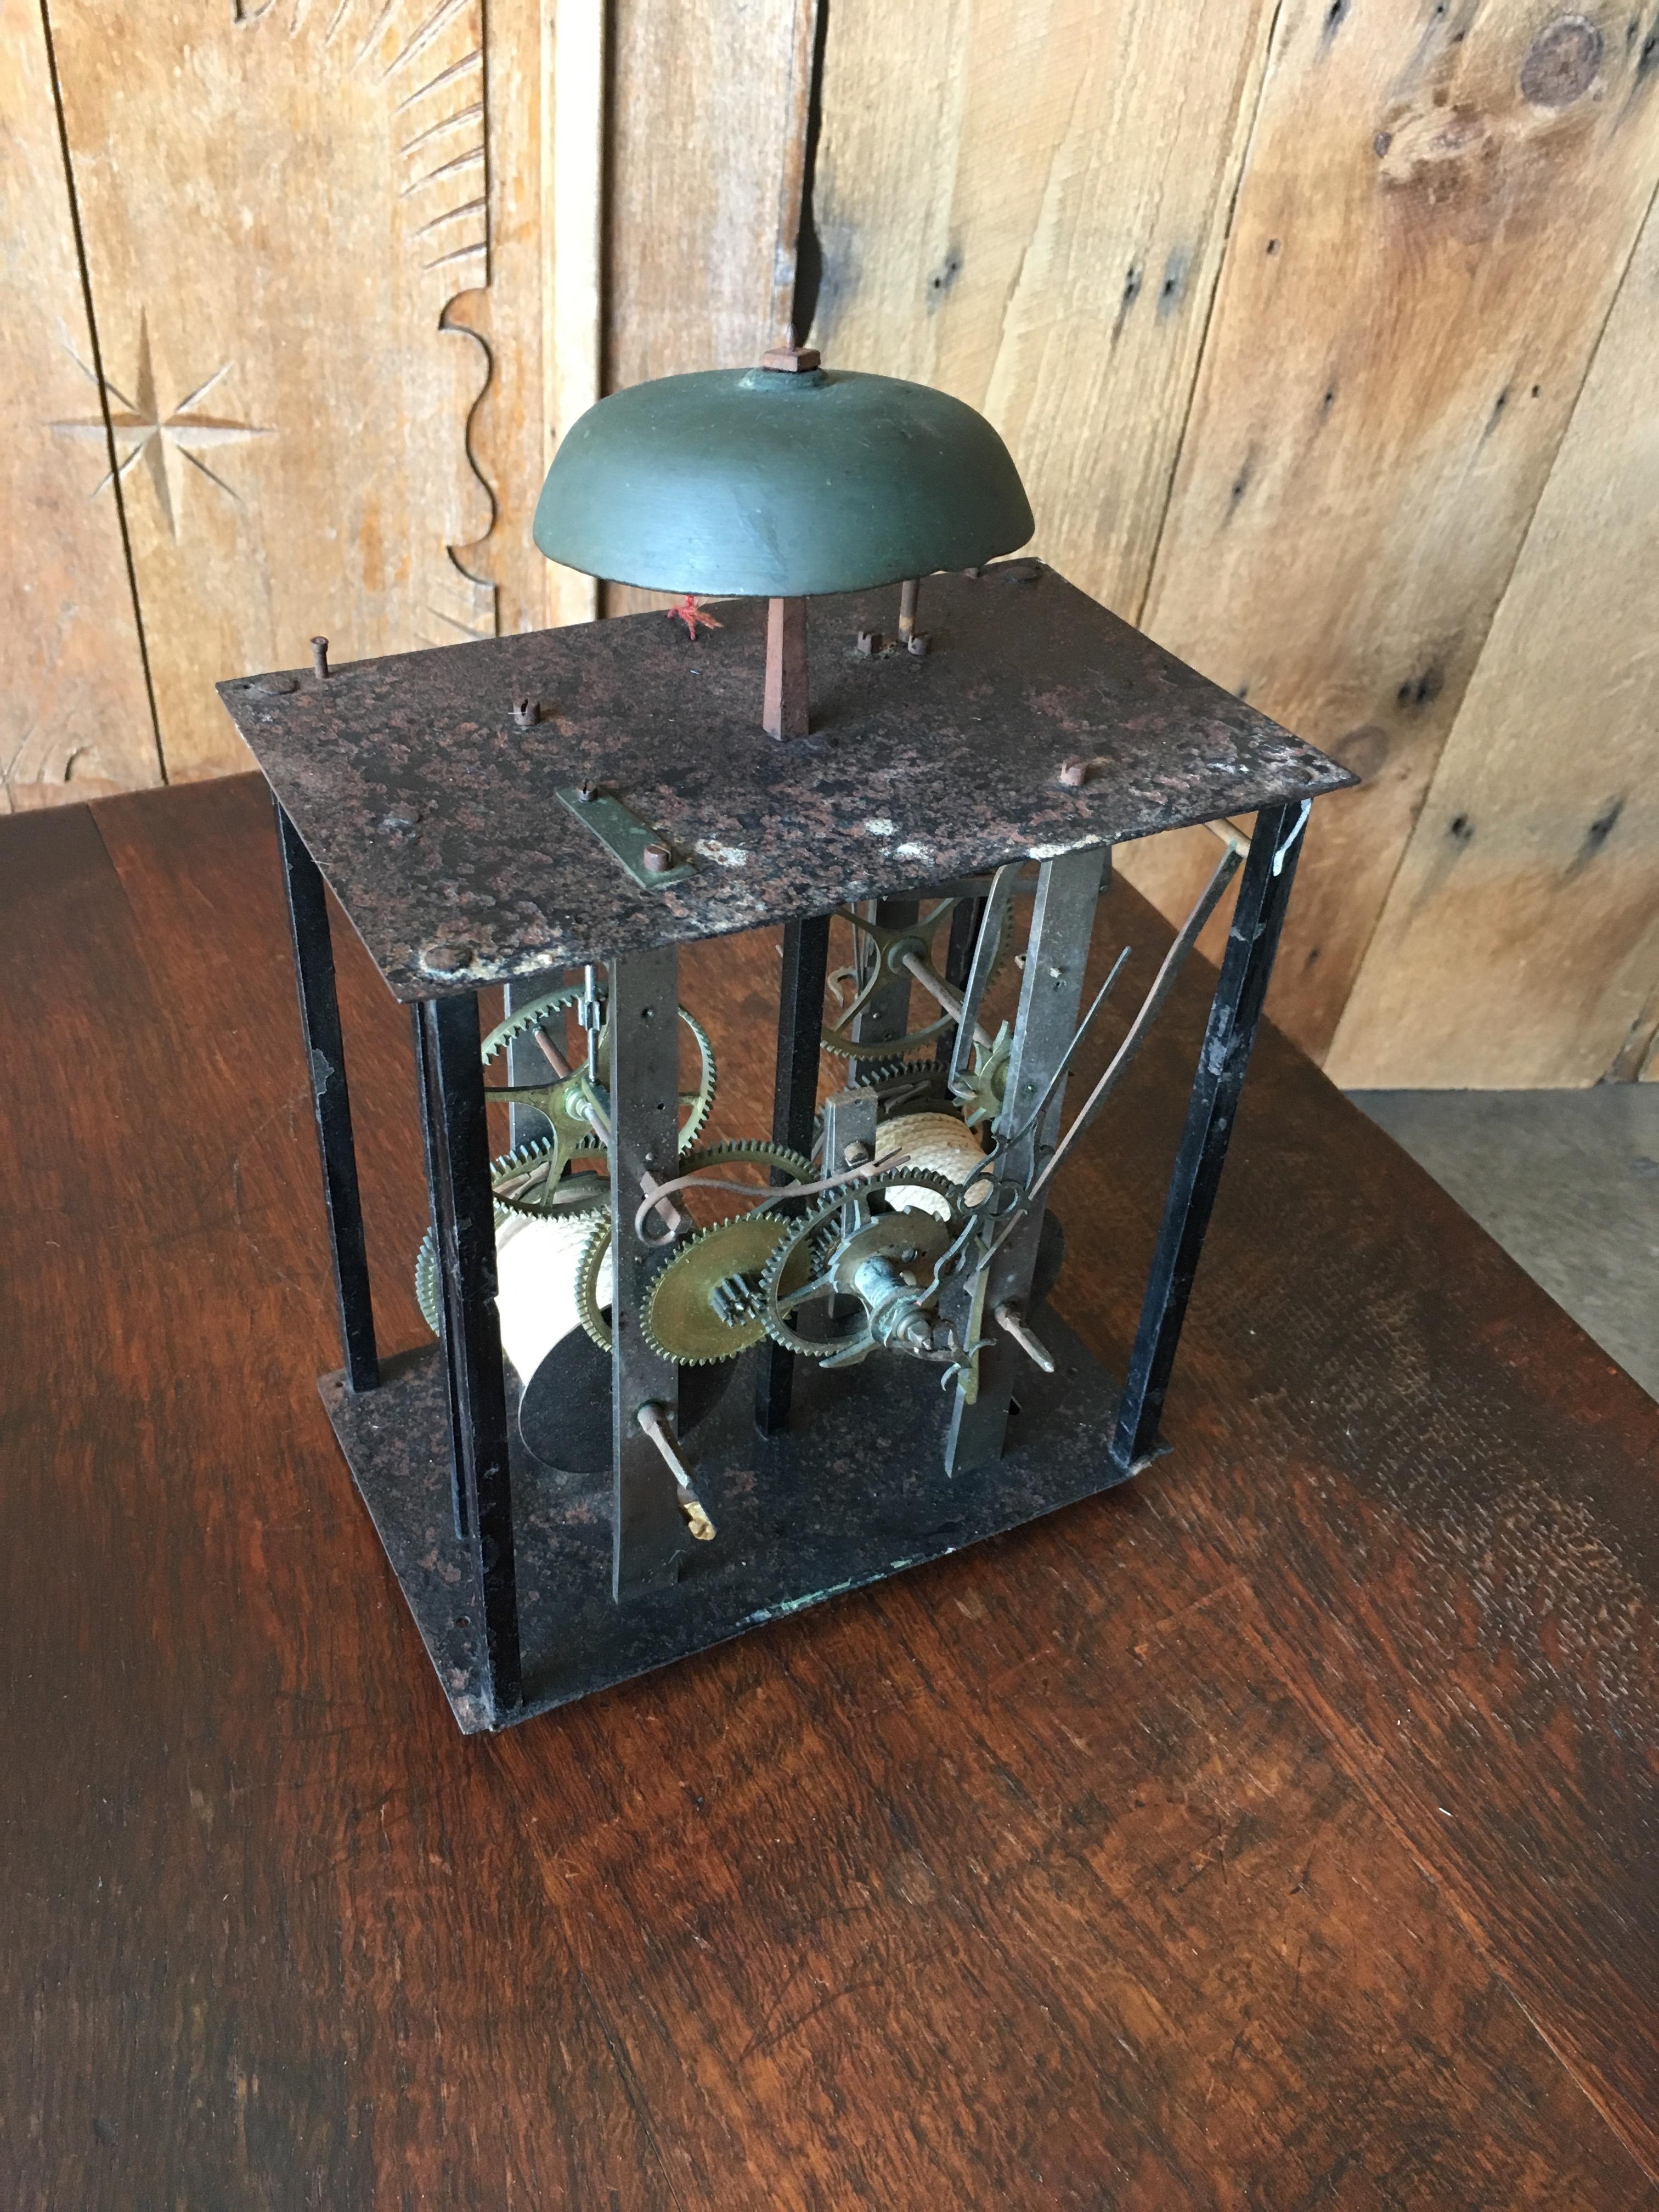 A great industrial accent for a tabletop or bookshelf the combination of brass and steel gears and a bronze bell. This movement is in non working condition and is used for decorative purposes.